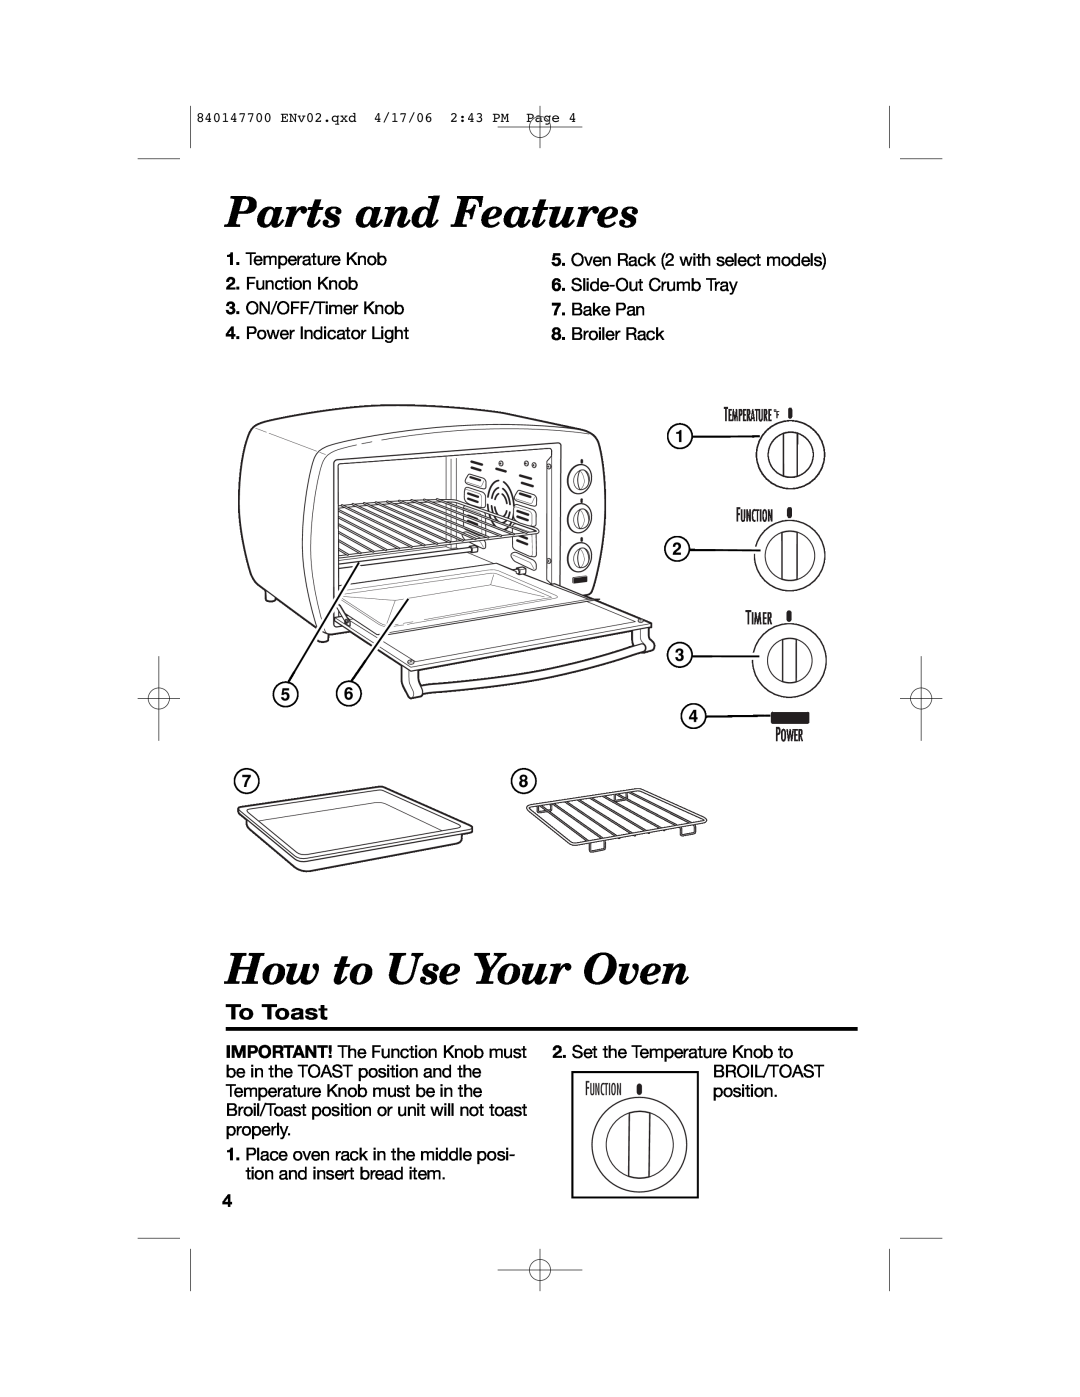 Hamilton Beach 31180 manual Parts and Features, How to Use Your Oven, To Toast 